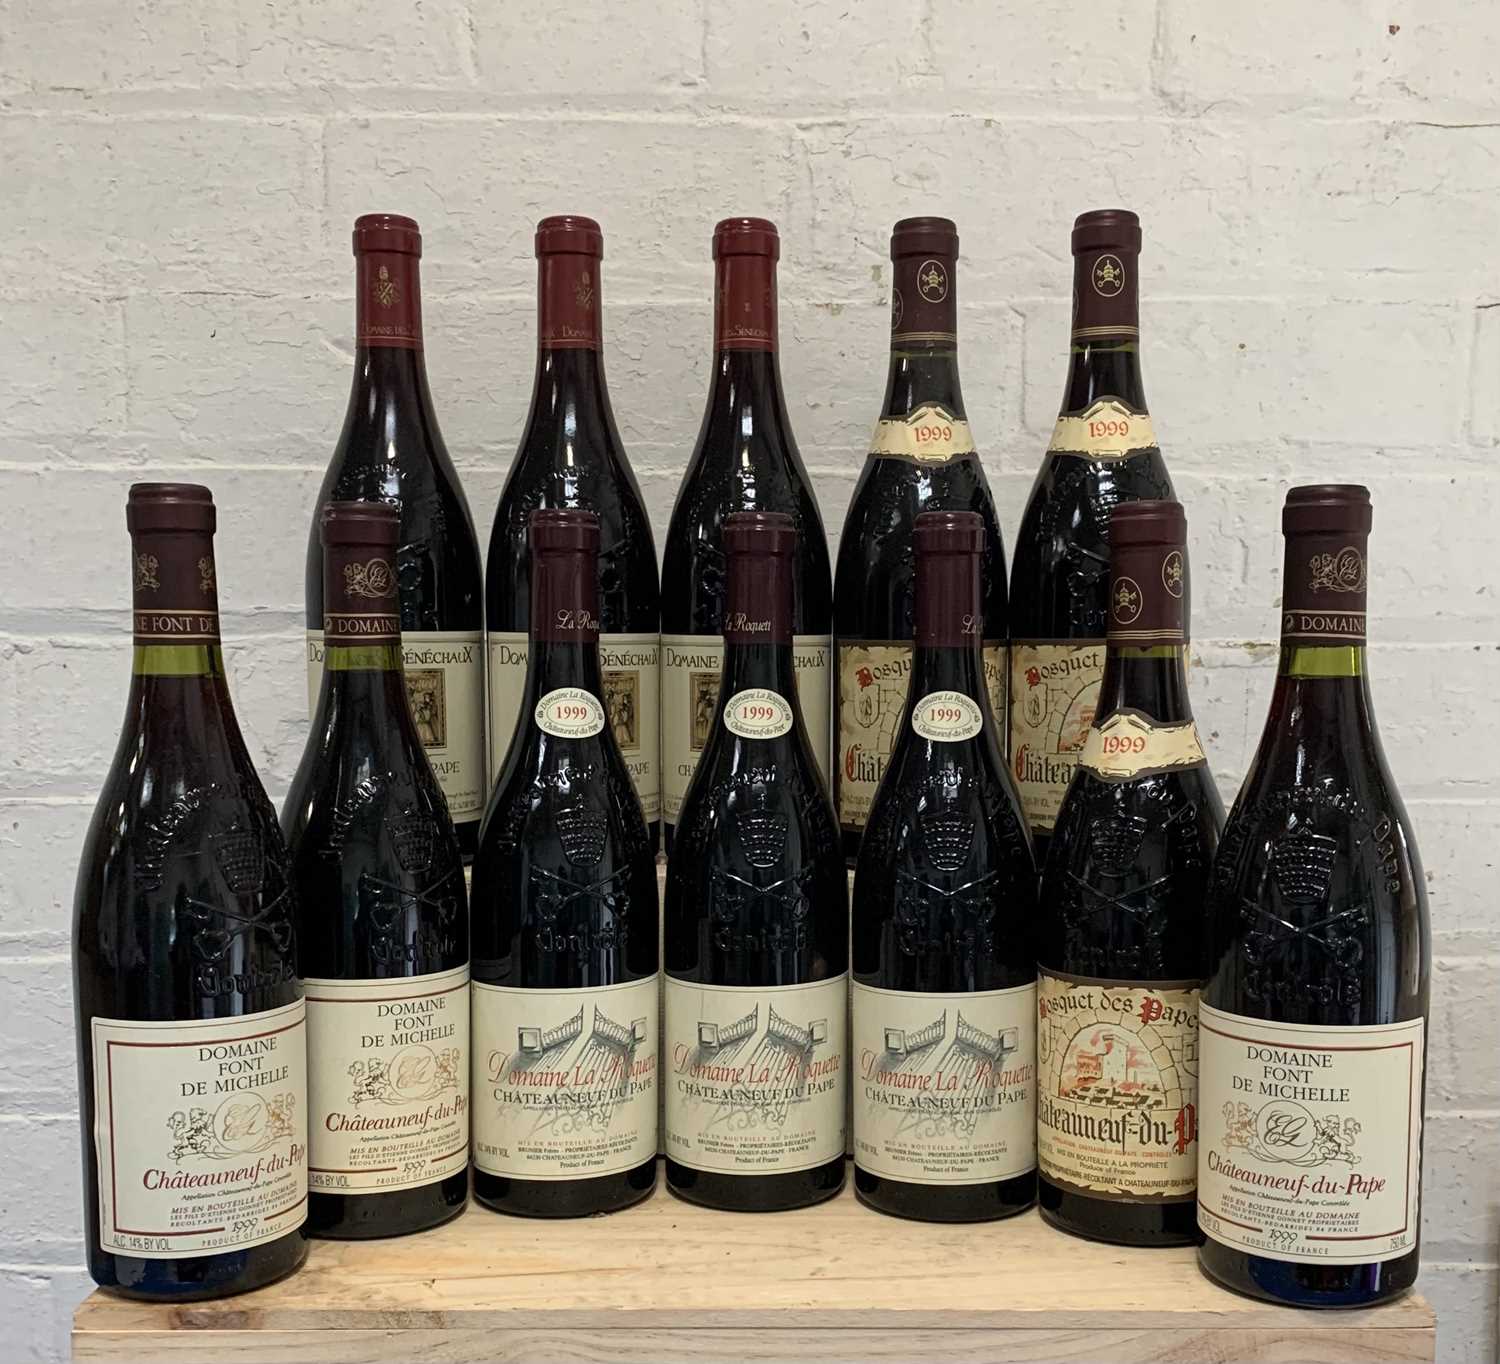 Lot 108 - 12 Bottles Mixed Lot Fine and Rare Chateauneuf du Pape from 1999 Vintage